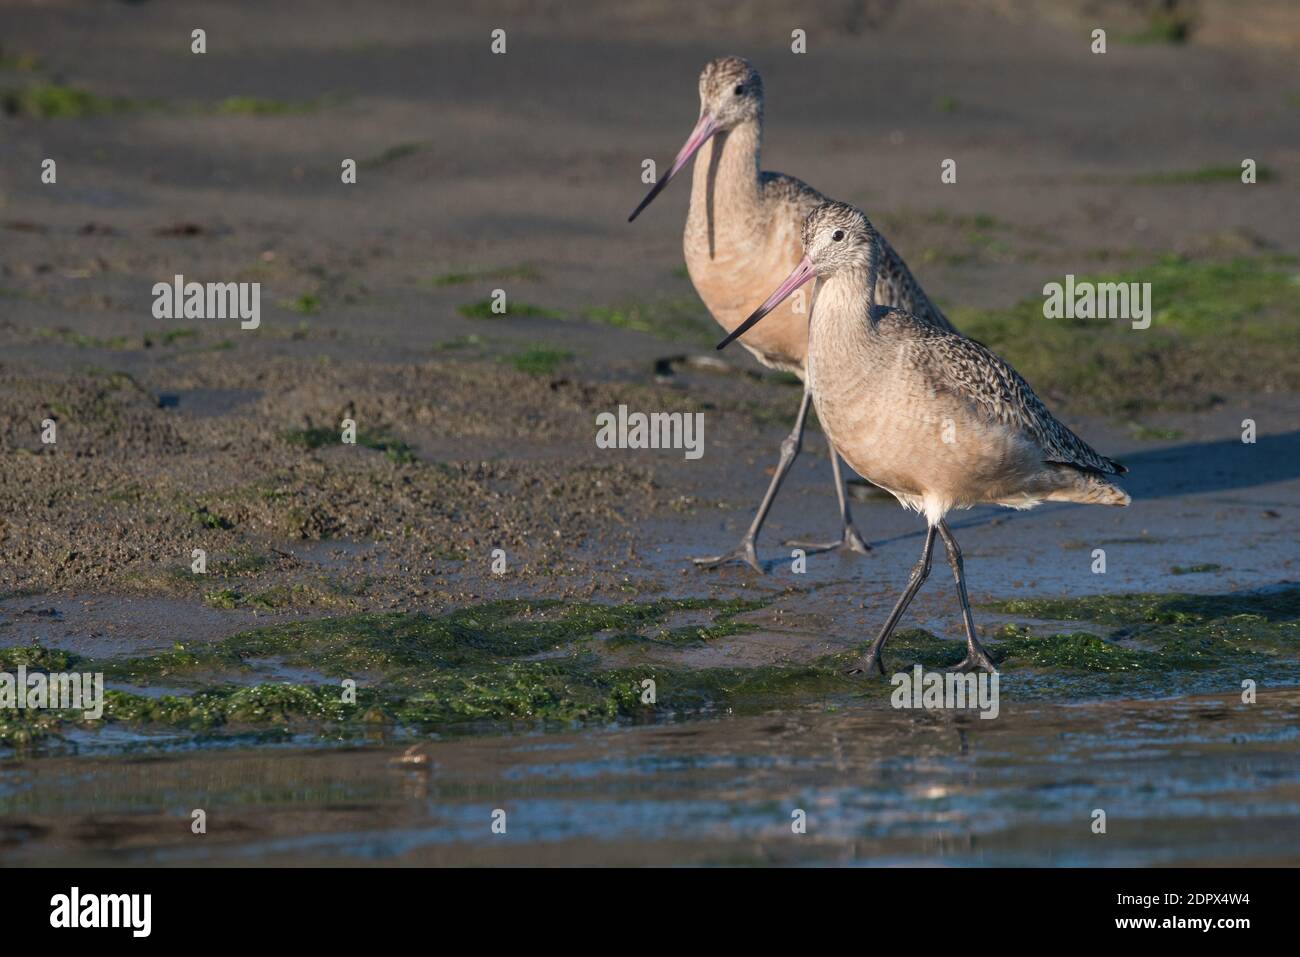 A pair of marbled godwit (Limosa fedoa) walk the edge of elkhorn slough in California searching for small invertebrates to feed on. Stock Photo